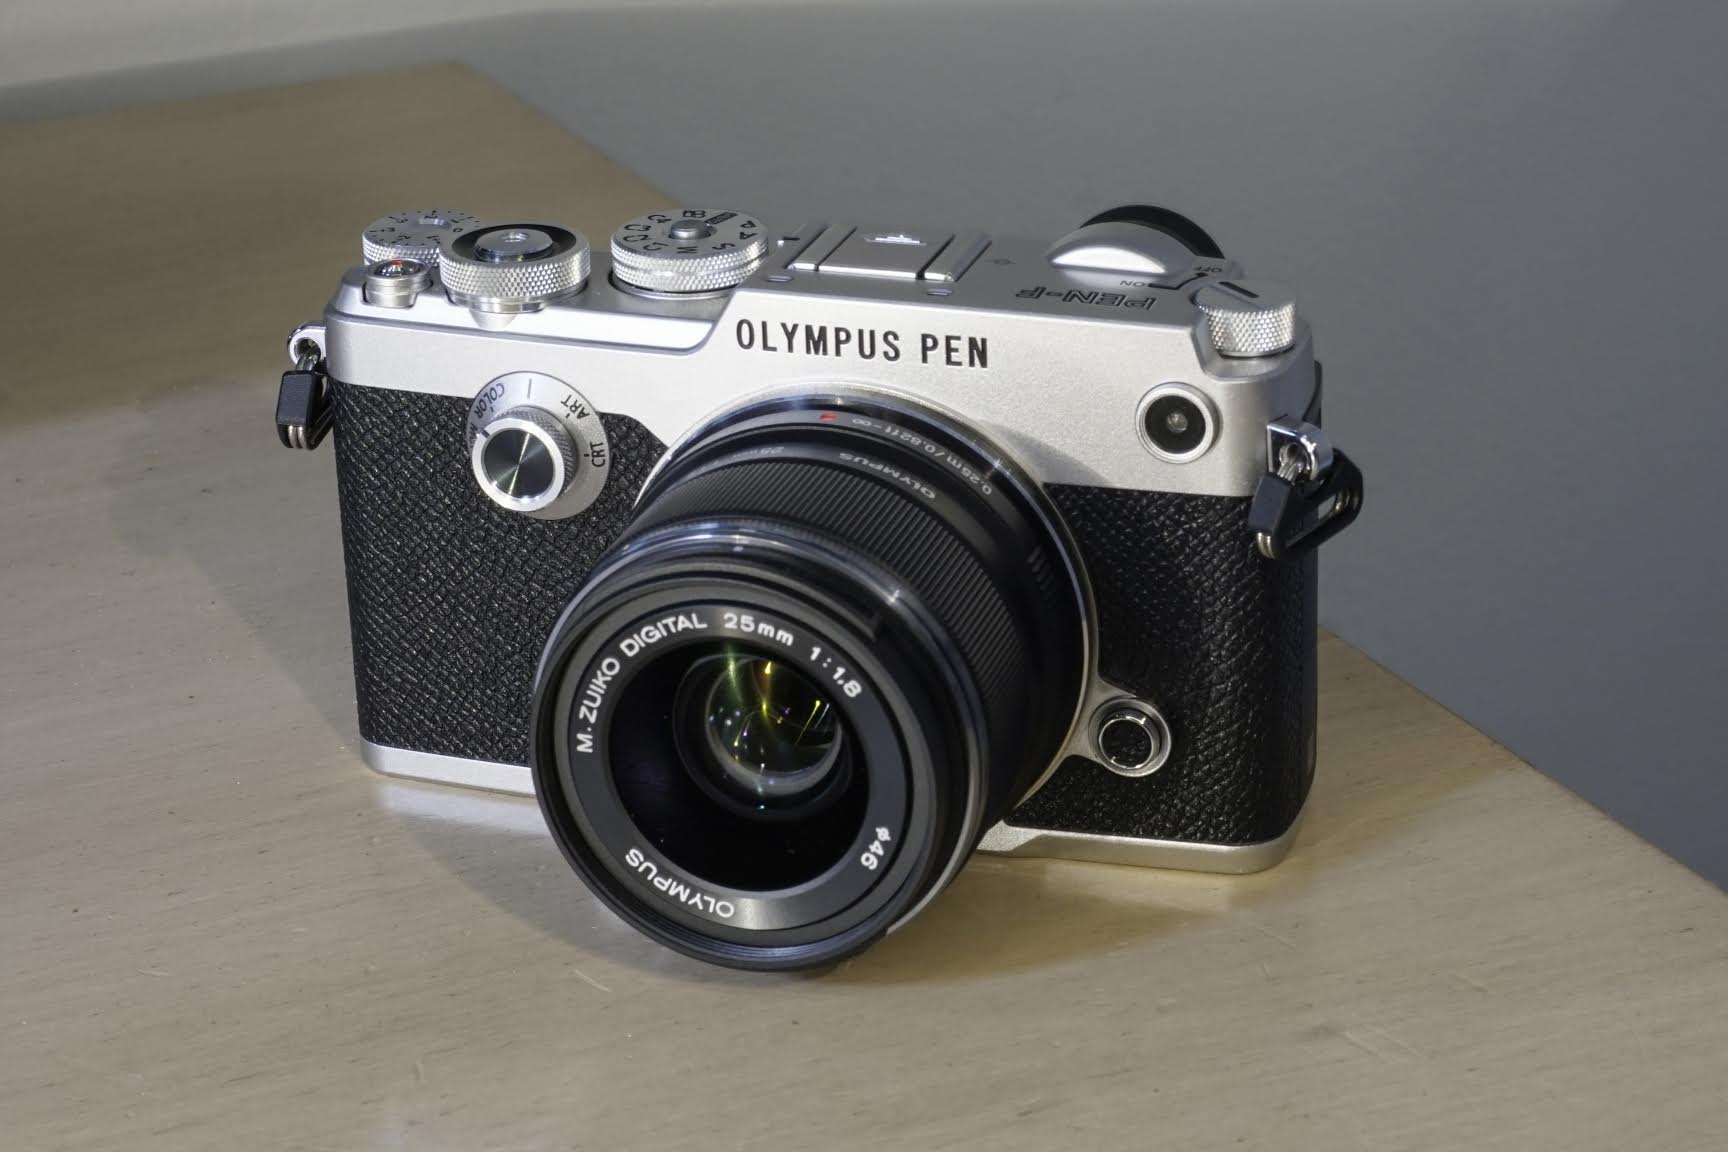 Hands On with the Olympus Pen-F Camera